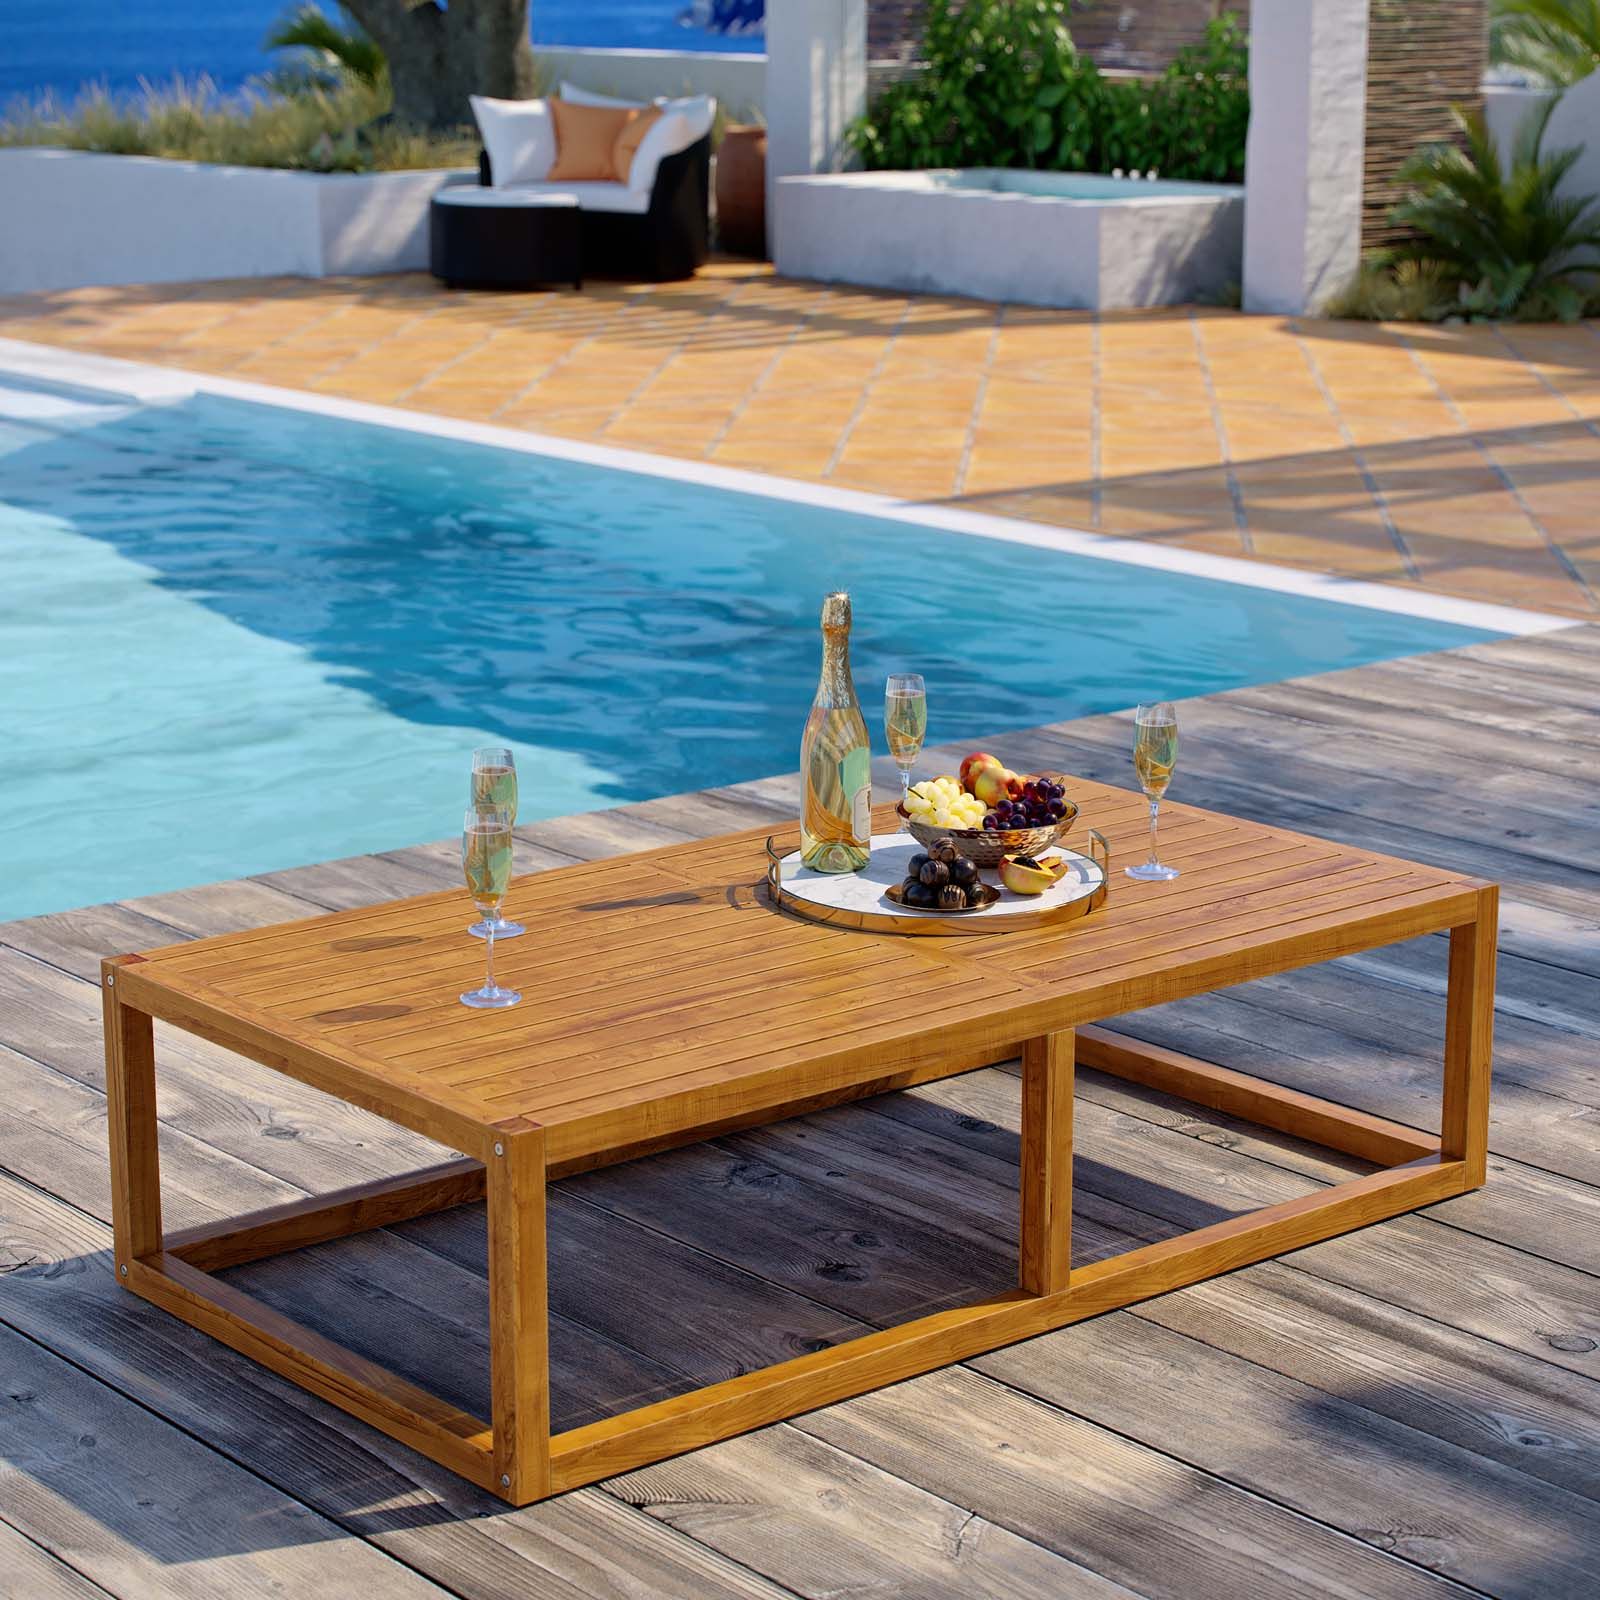 Modern Outdoor Patio Coffee Tables Throughout Current Newbury Outdoor Patio Premium Grade A Teak Wood Coffee Table Natural (View 13 of 15)